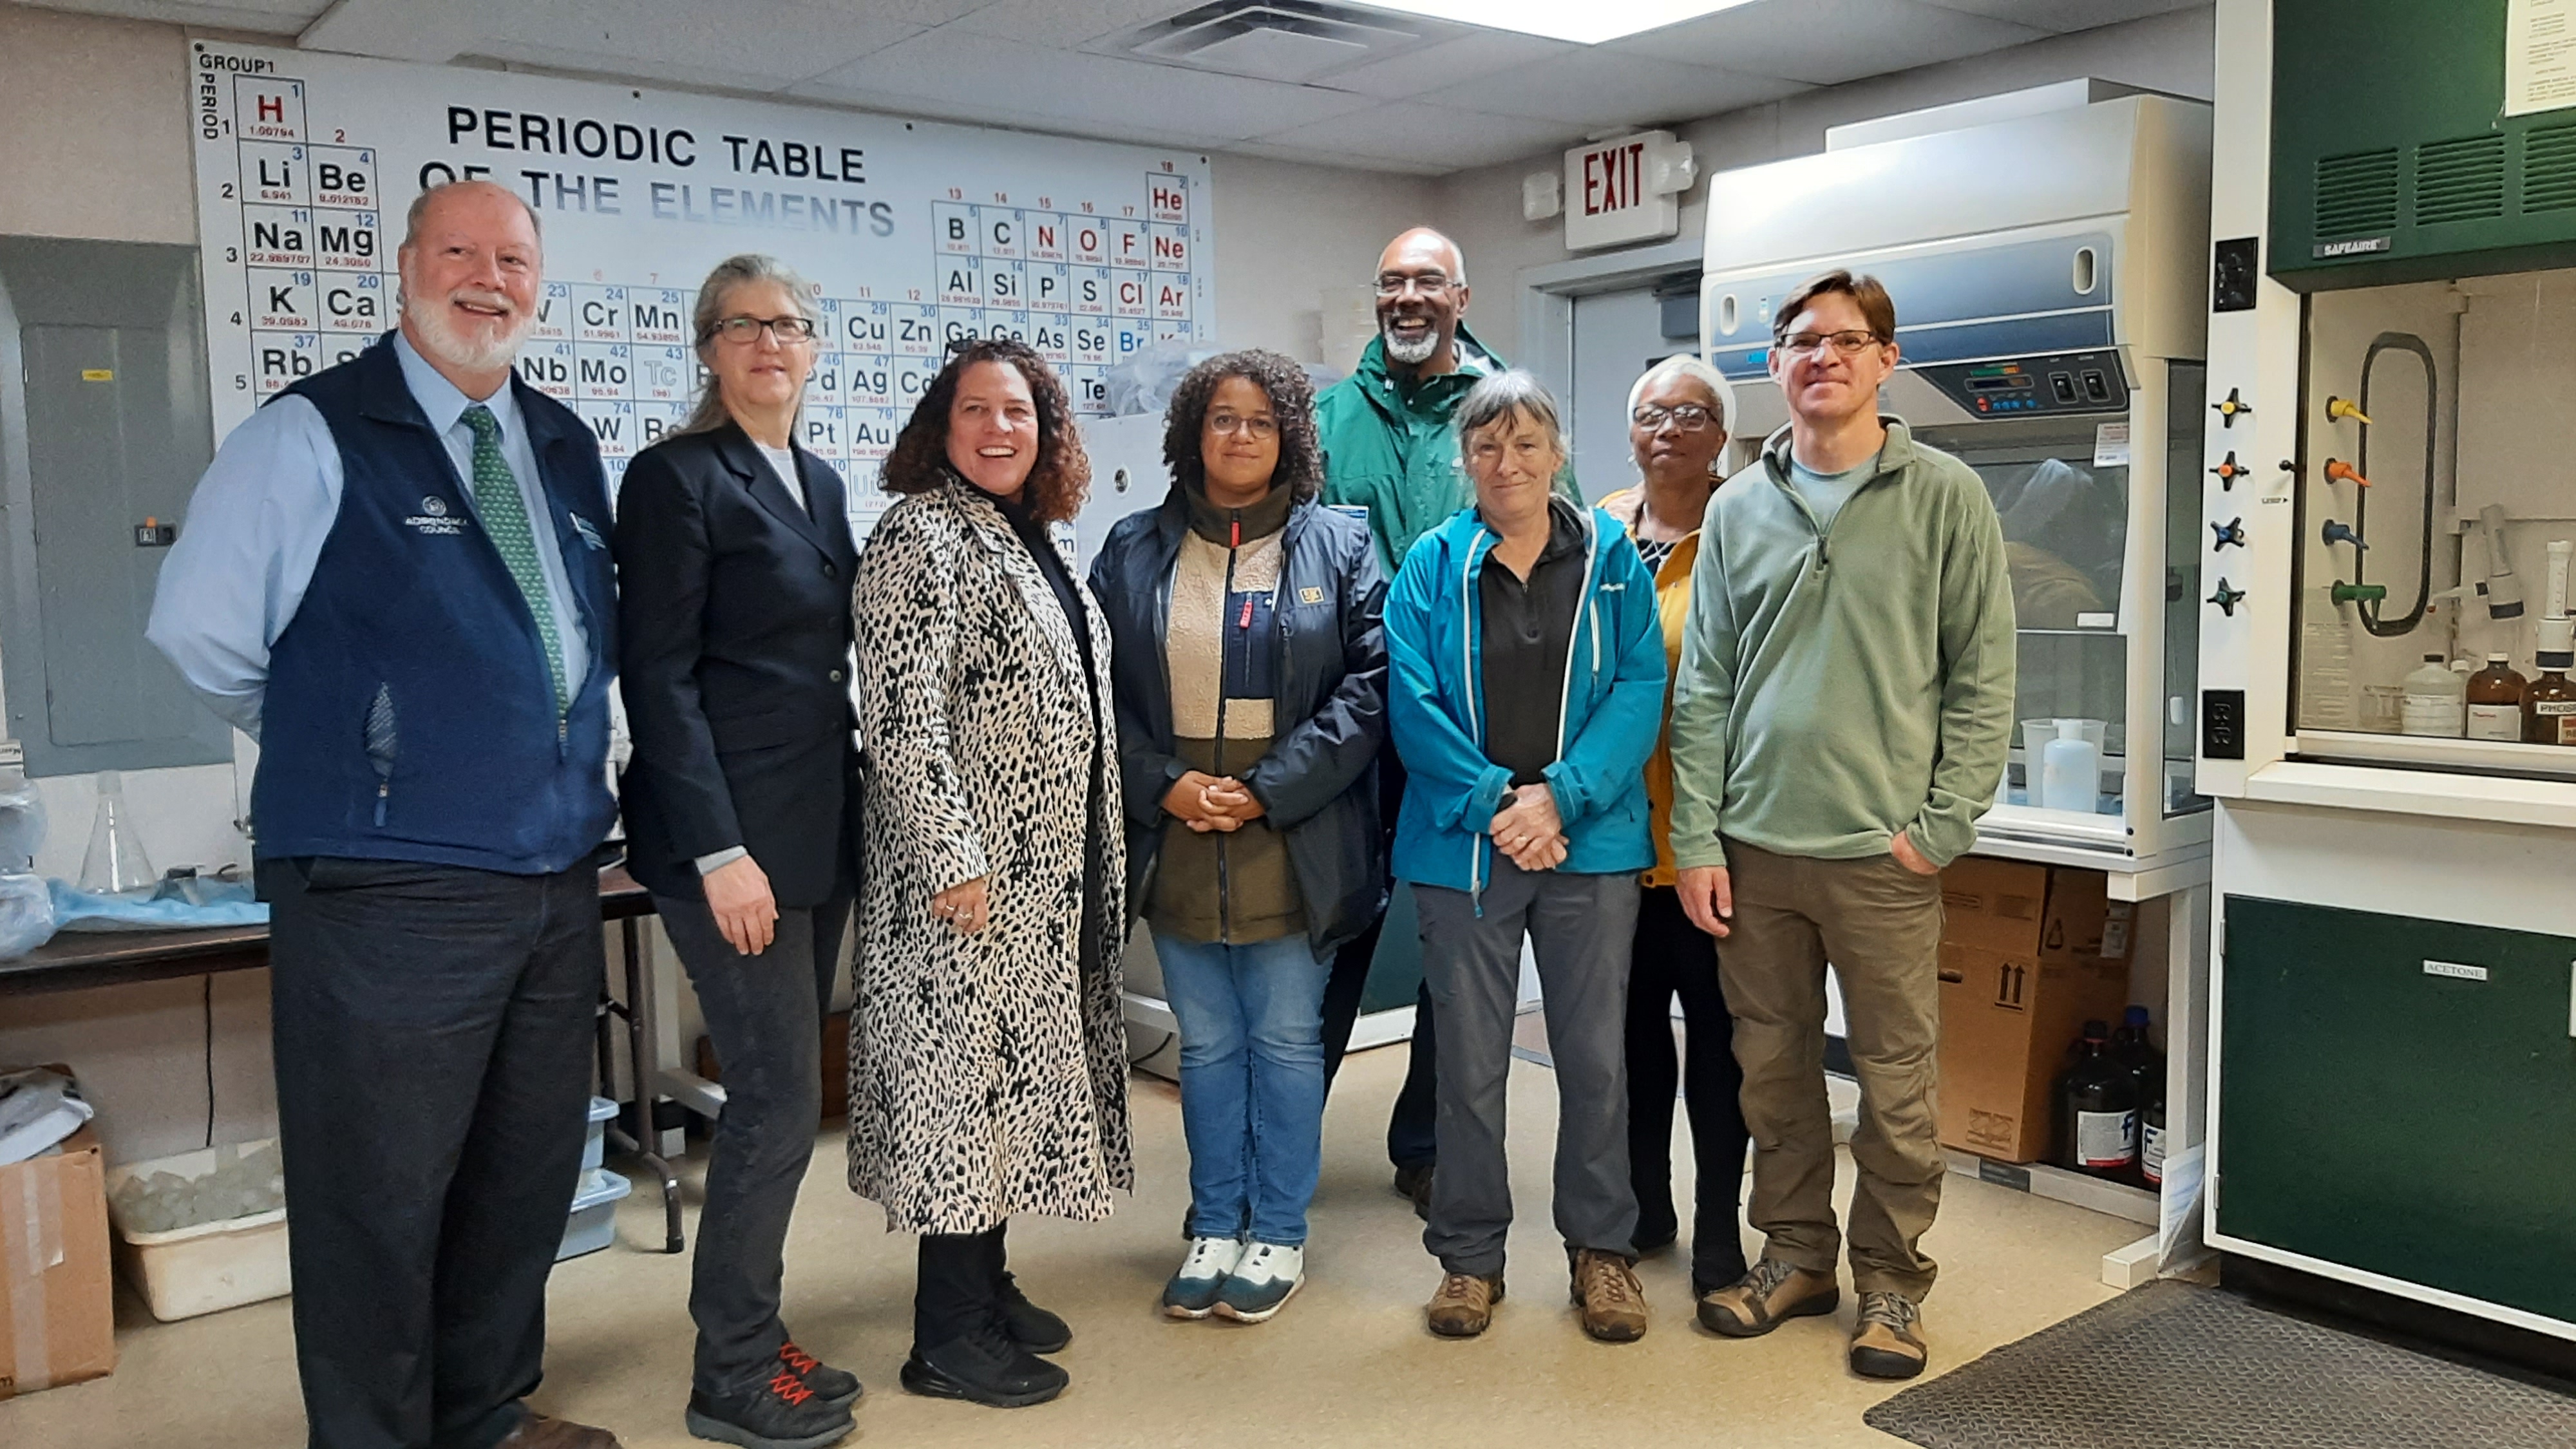 Staff from the Adirondack Council, Ausable River Association, and Adirondack Lakes Survey Corp host EPA Region 2 administrator Lisa Garcia and Assemblywoman Michaelle Solages